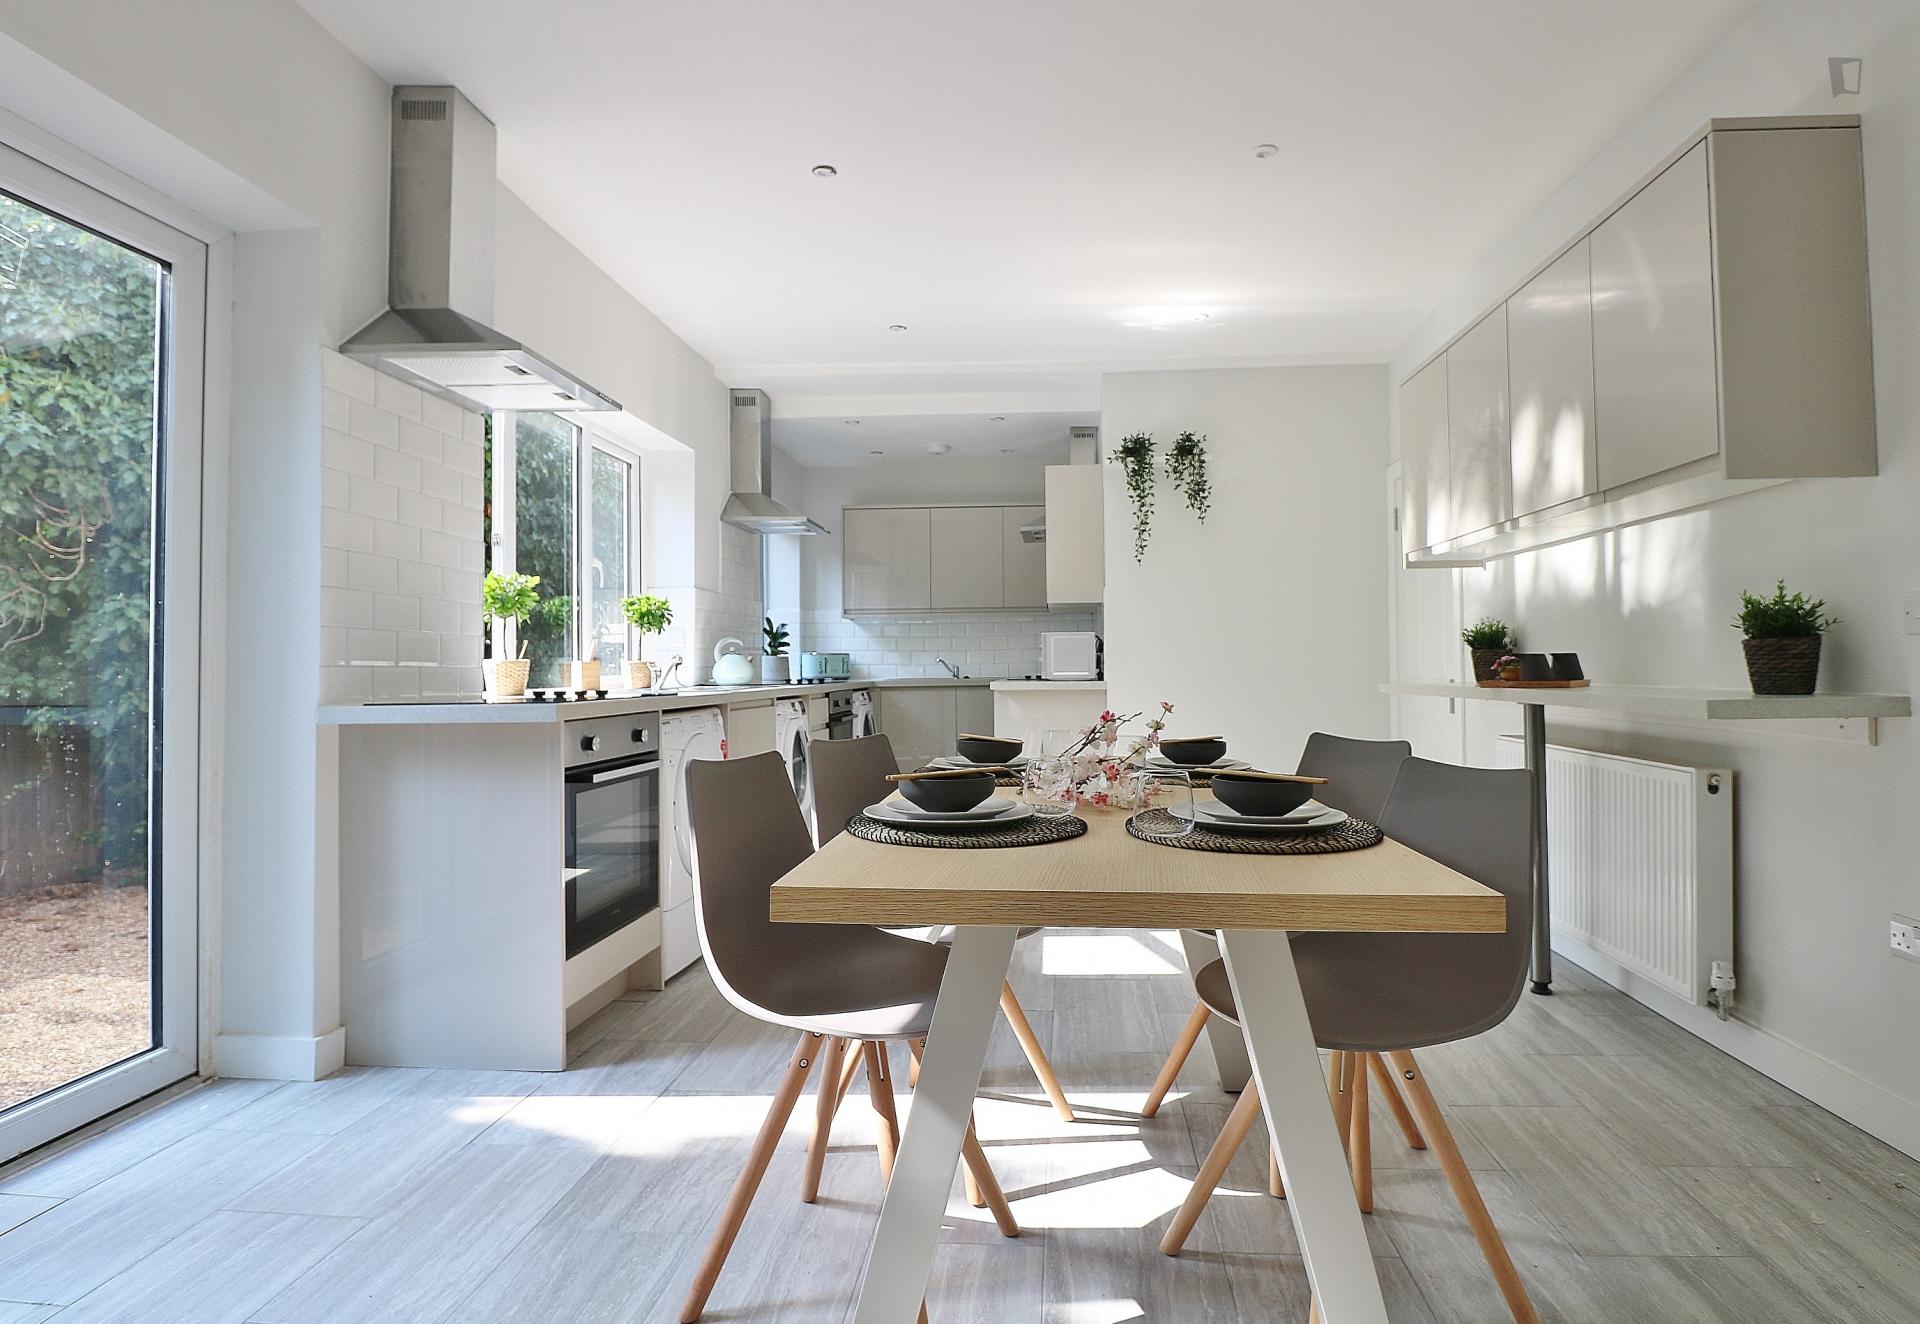 Place Lane- Beautiful functional Home in London